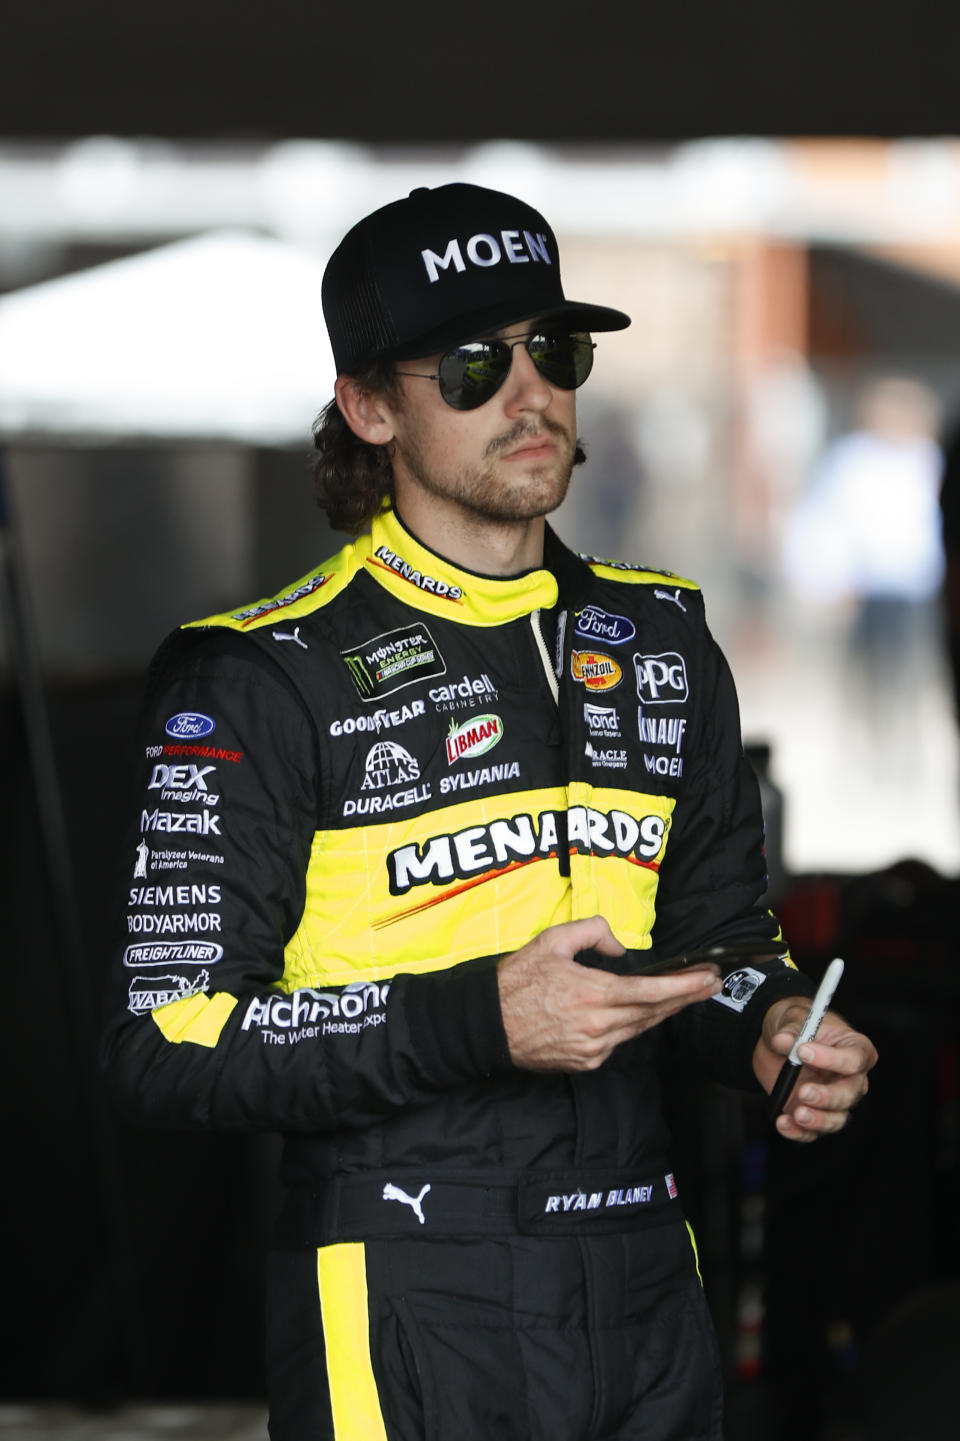 Ryan Blaney watches during practice for a NASCAR Cup Series auto race at Michigan International Speedway in Brooklyn, Mich., Saturday, Aug. 10, 2019. (AP Photo/Paul Sancya)